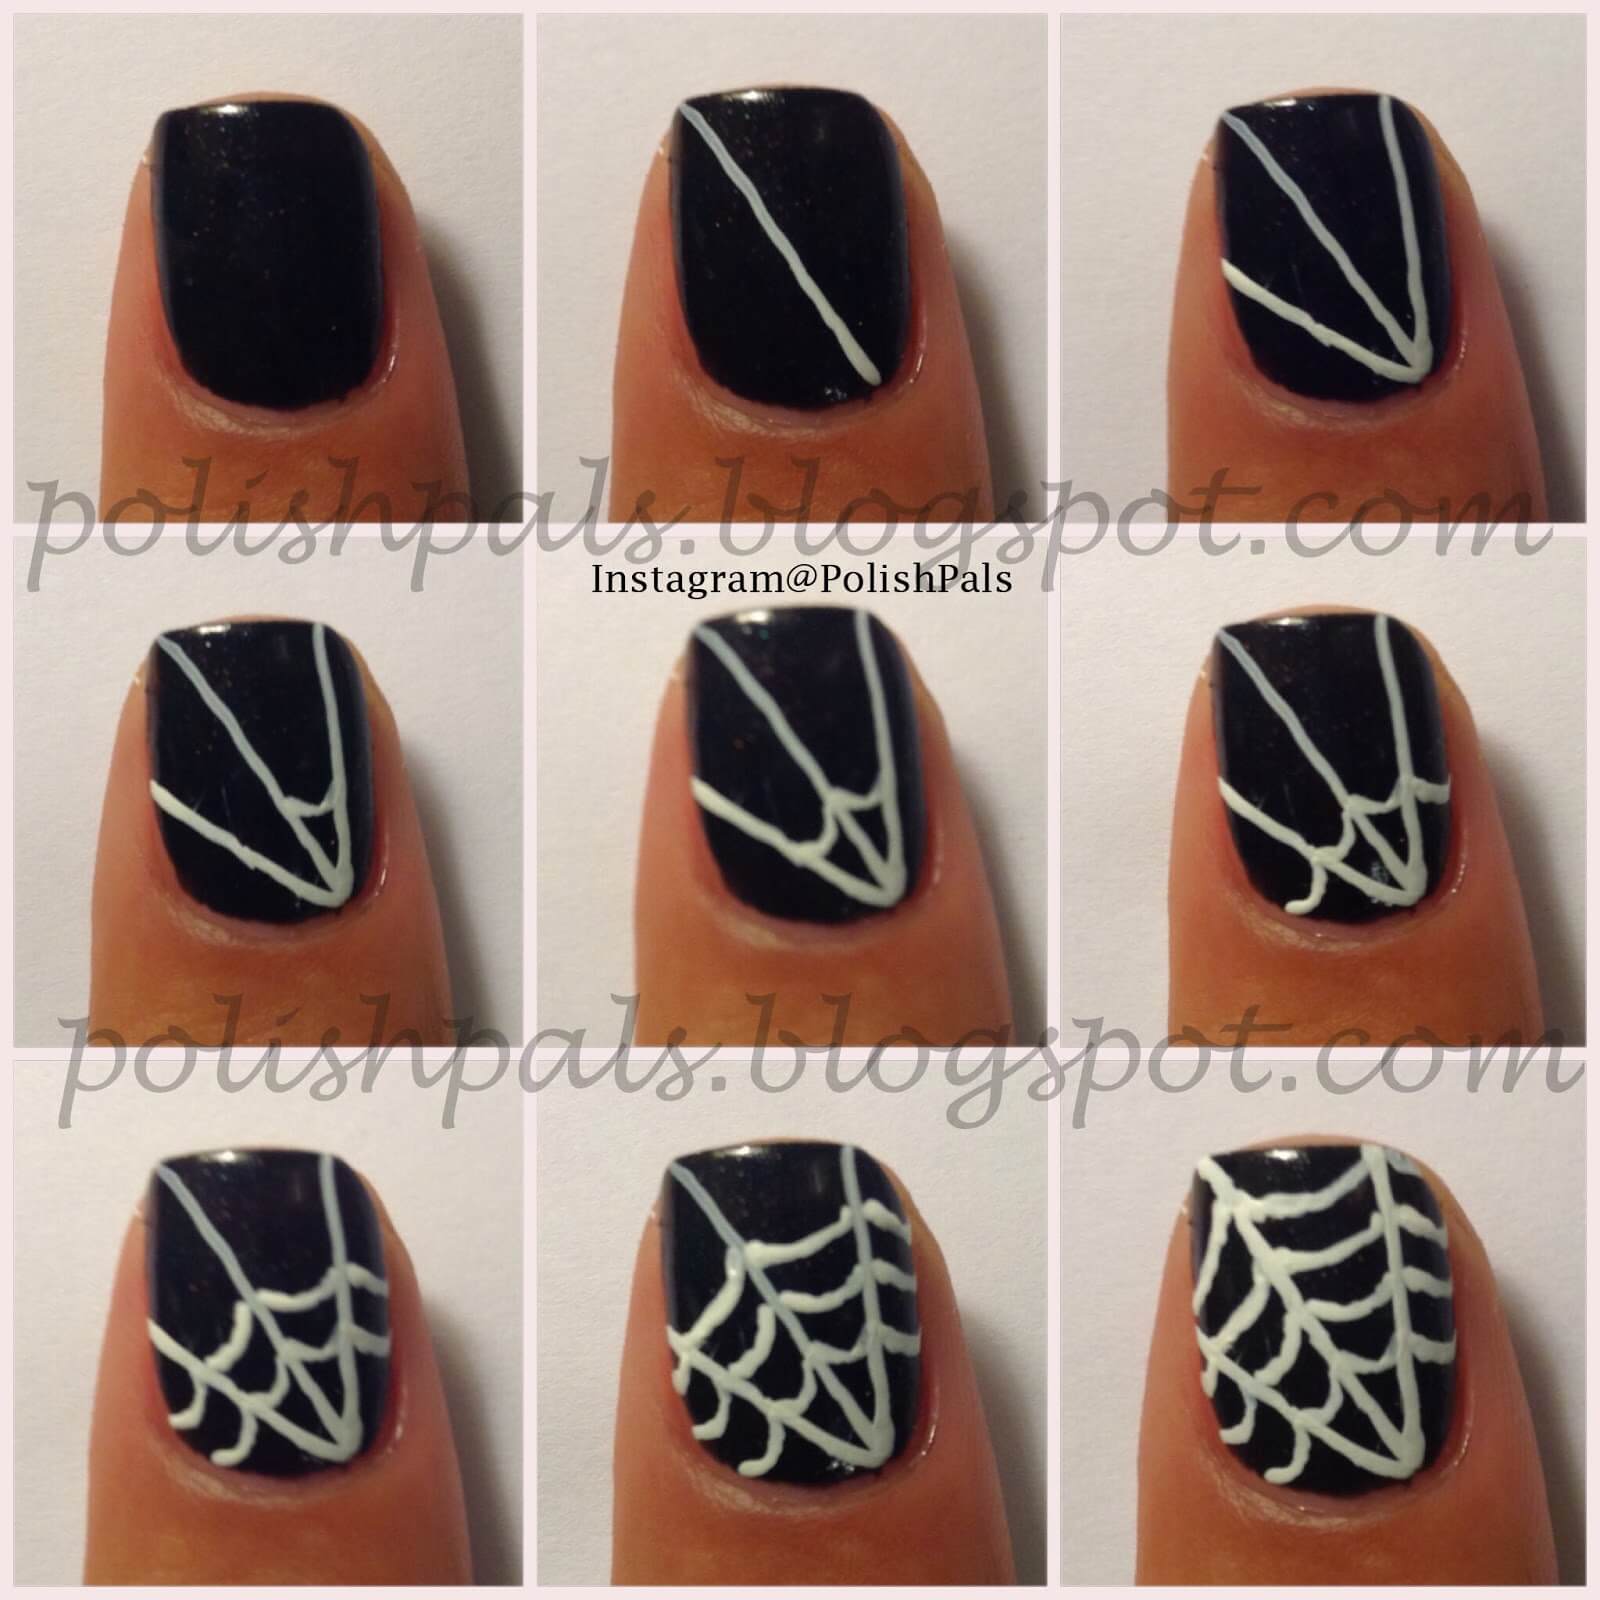 Spooky spider webs to complete any Halloween costume or outfit.